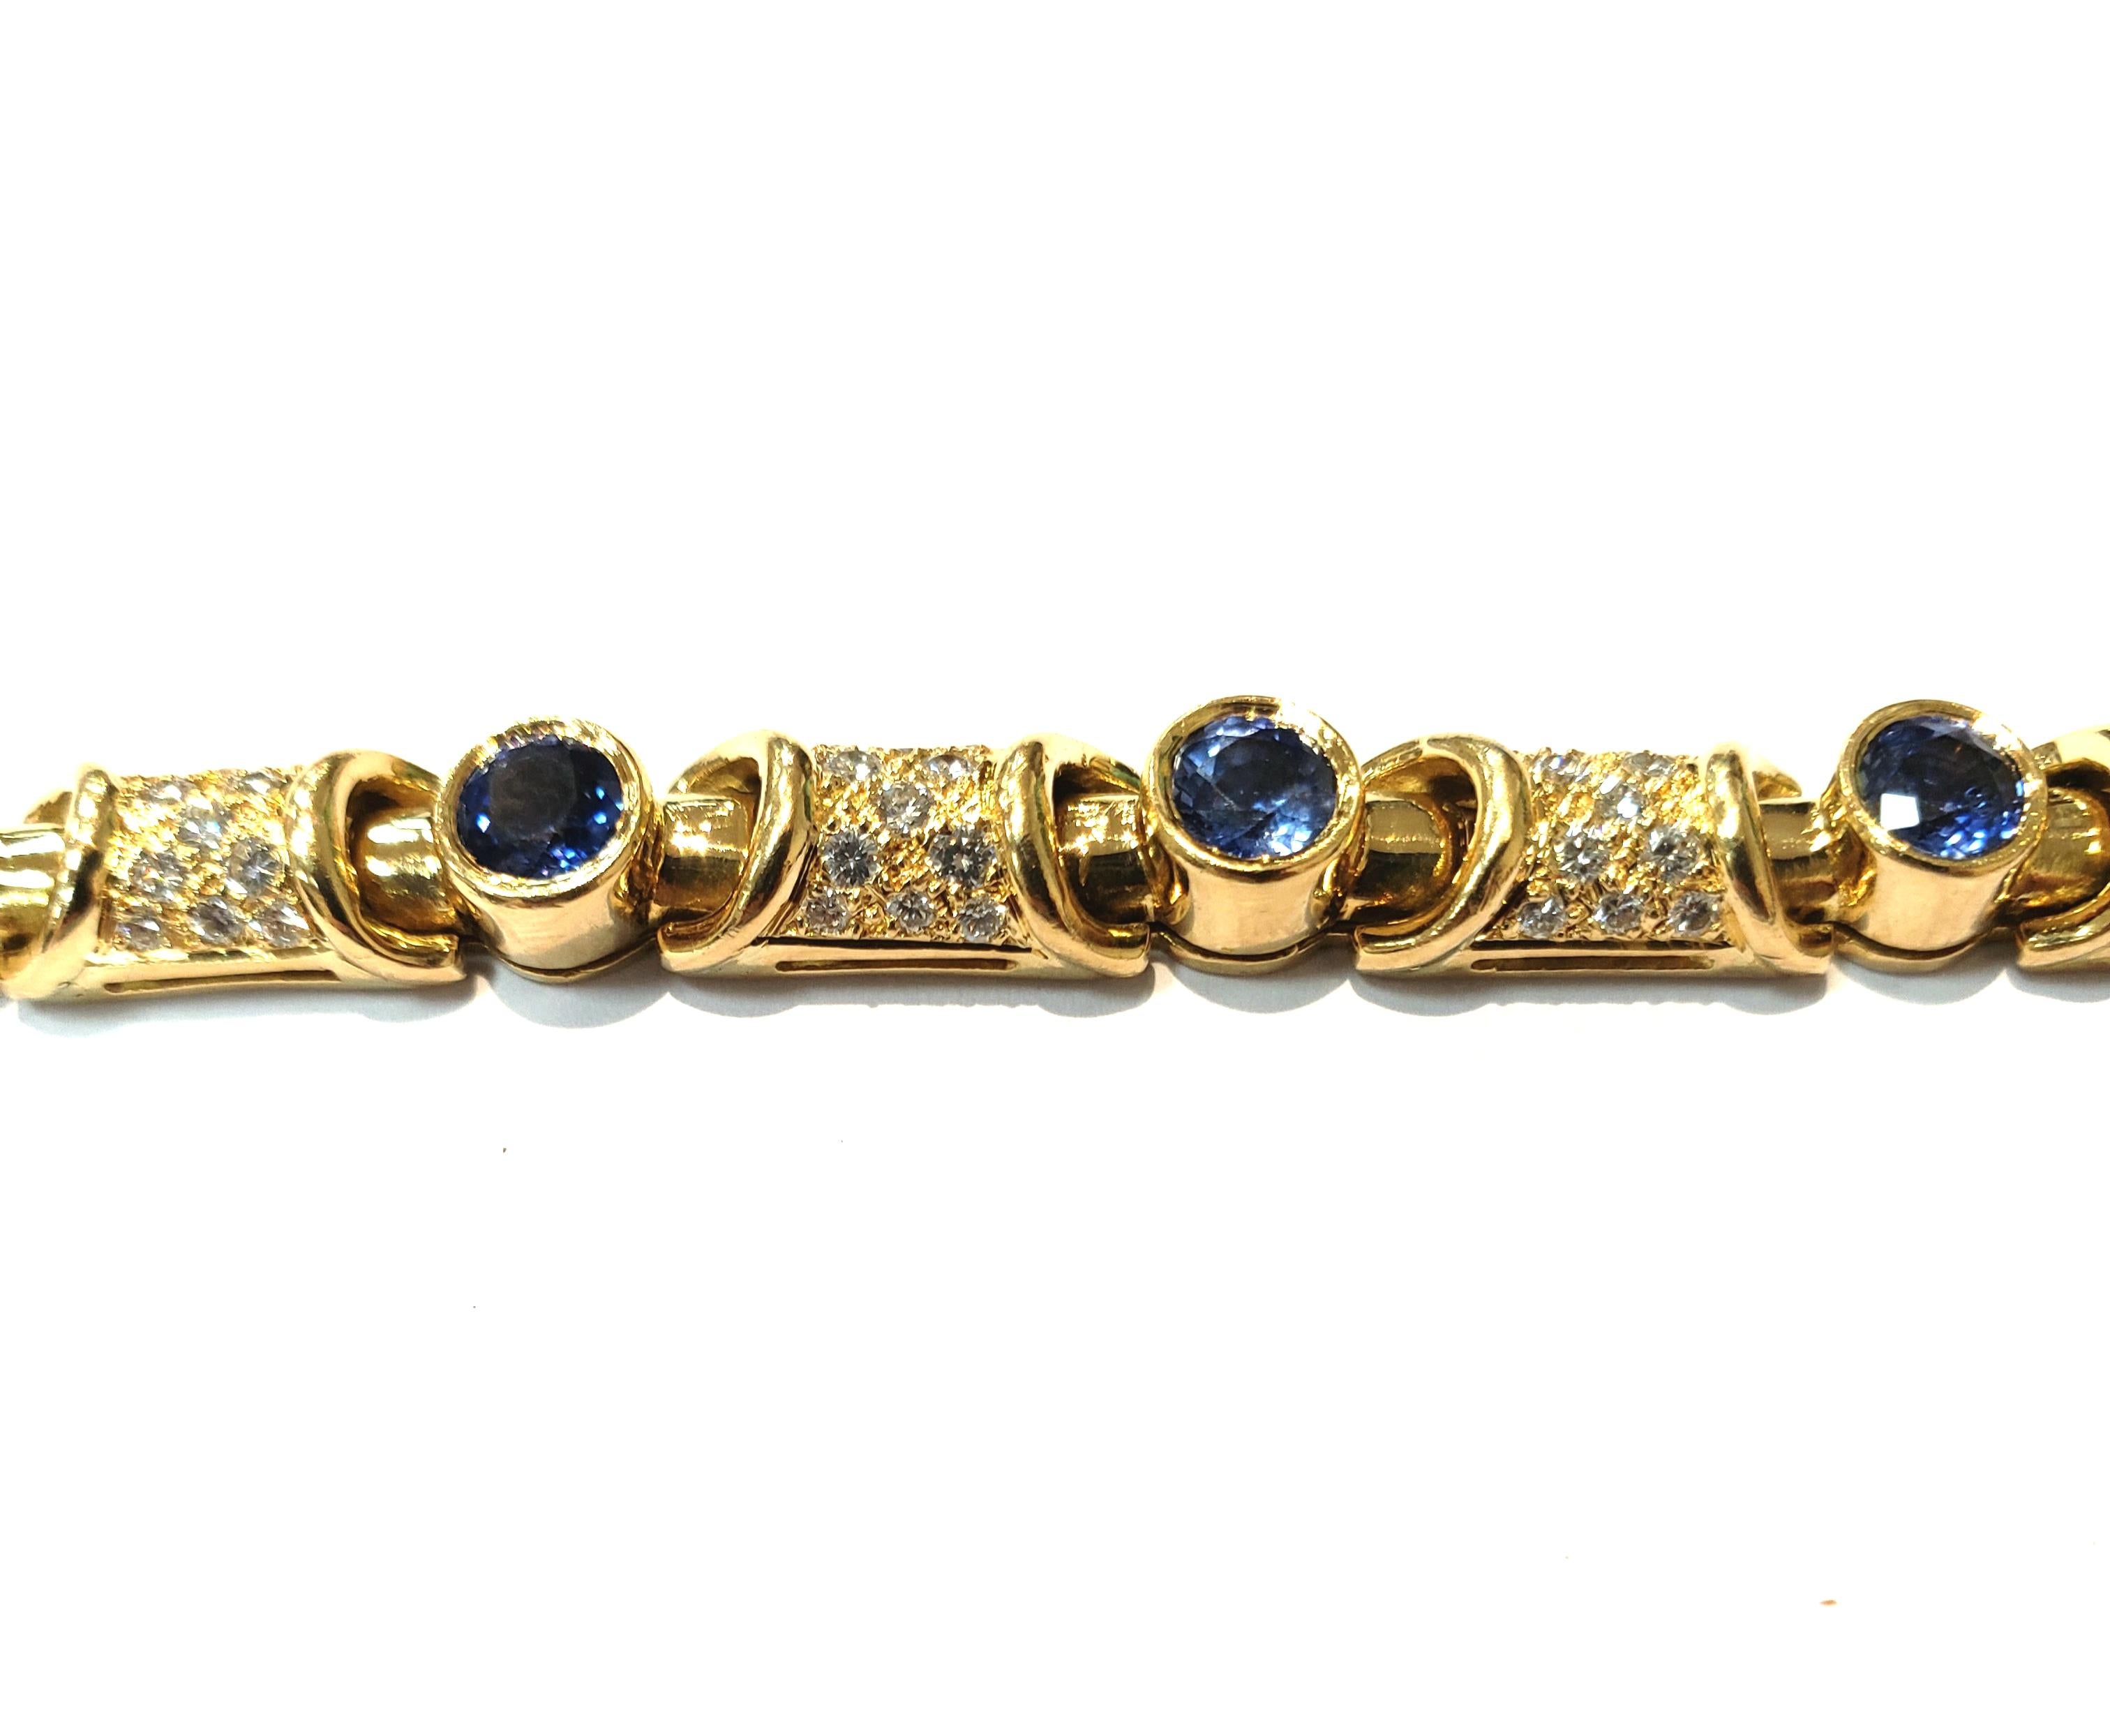 18 Karat Yellow Gold and Diamond Link Bracelet with Bezel Set Blue Sapphires In Good Condition For Sale In Red Bank, NJ